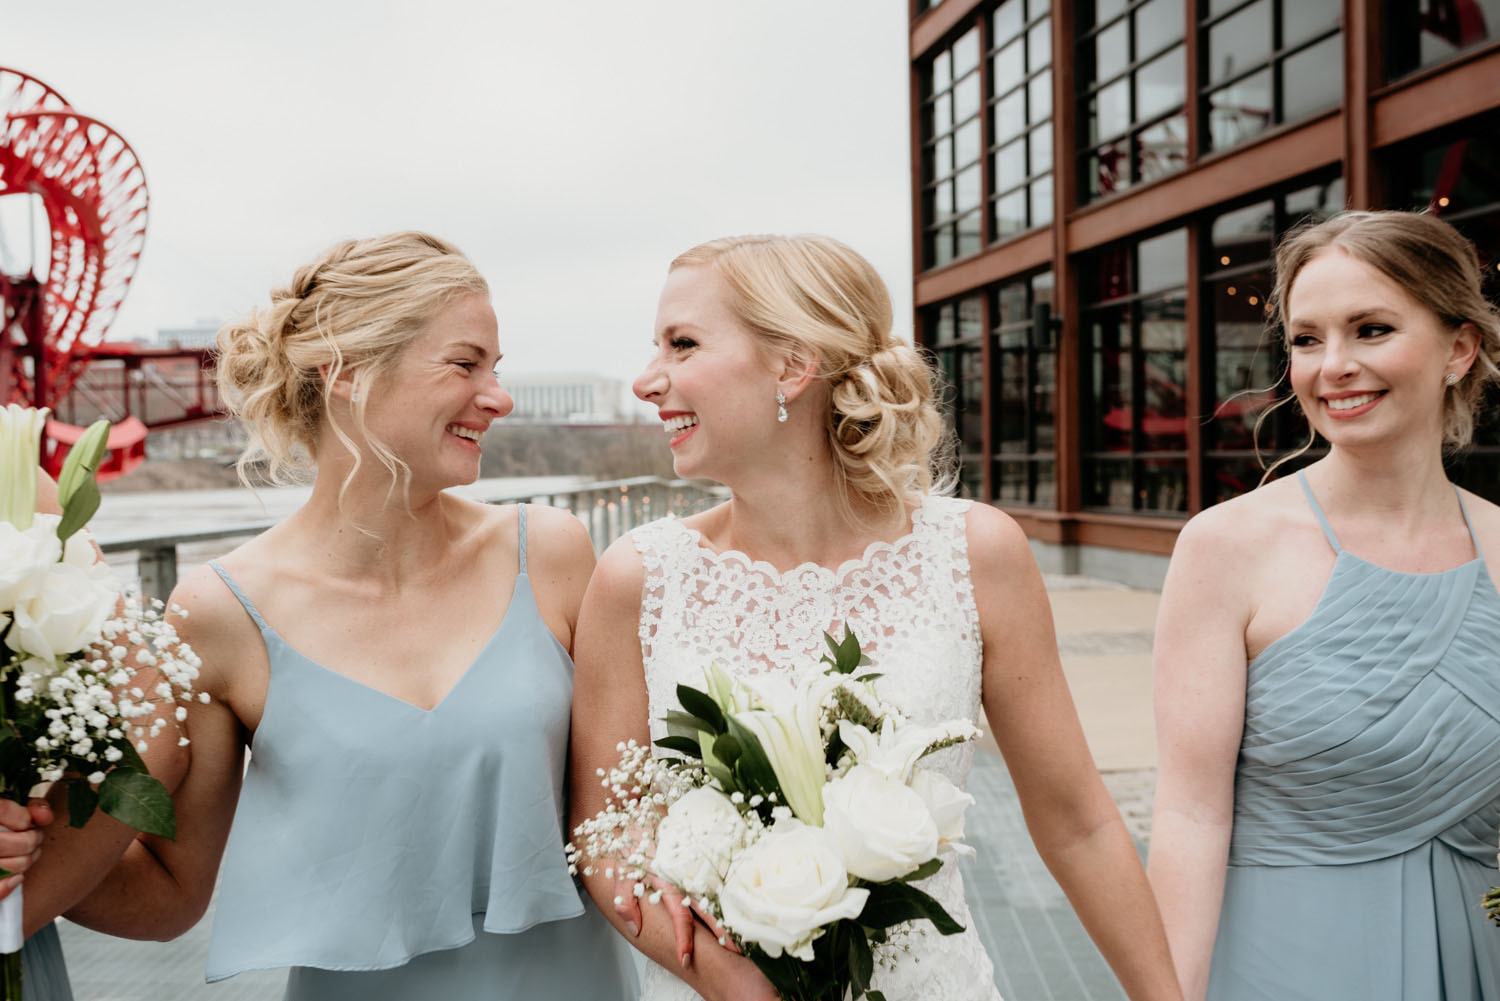 Laura Laughing with Bridesmaid